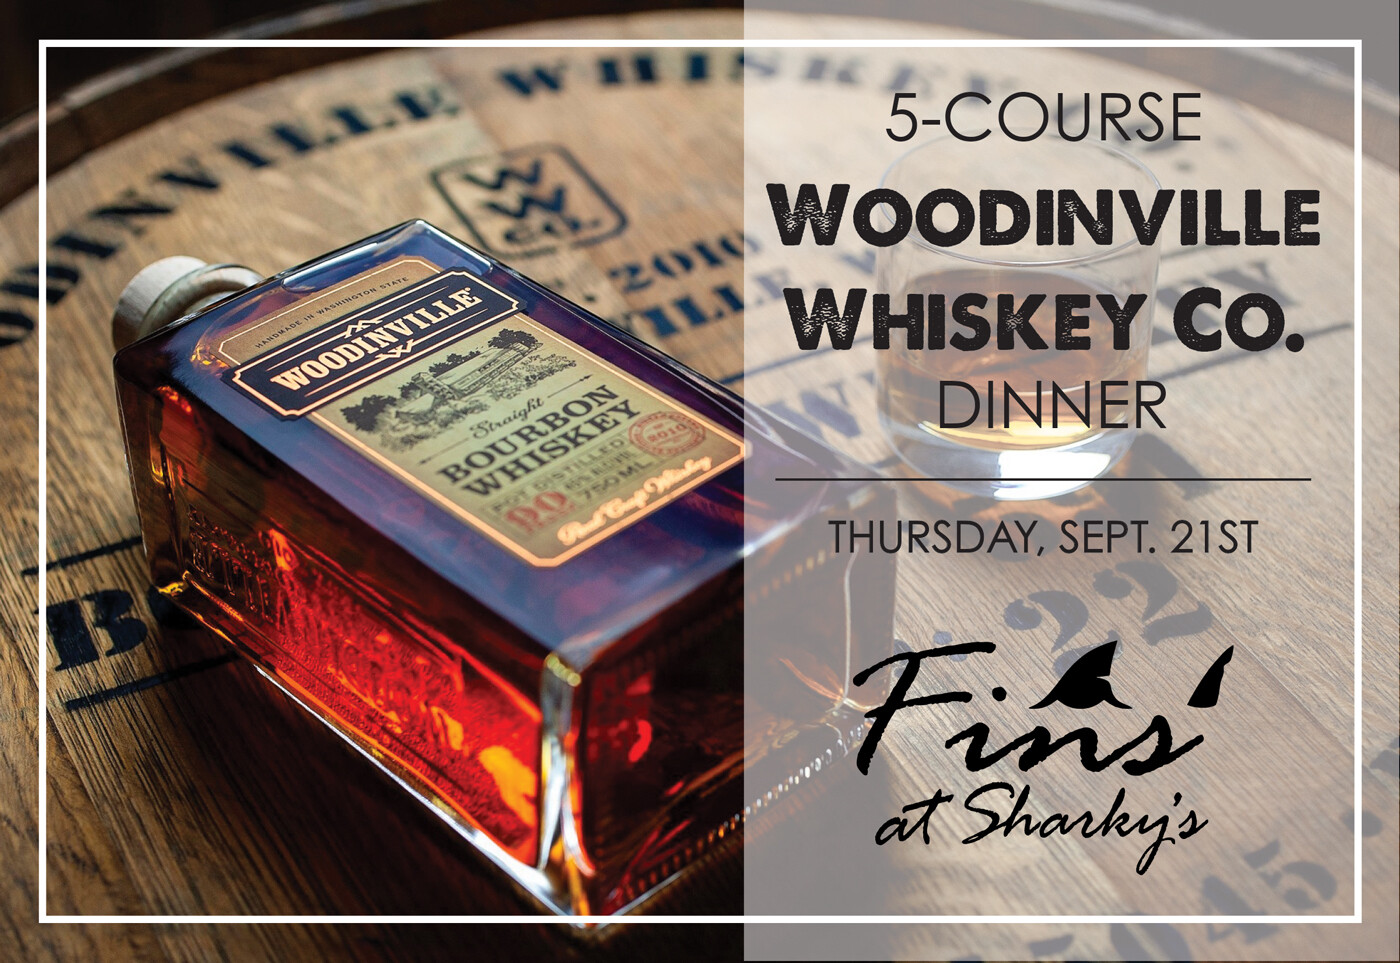 Fins' 5-Course Woodinville Whiskey Co. Dinner